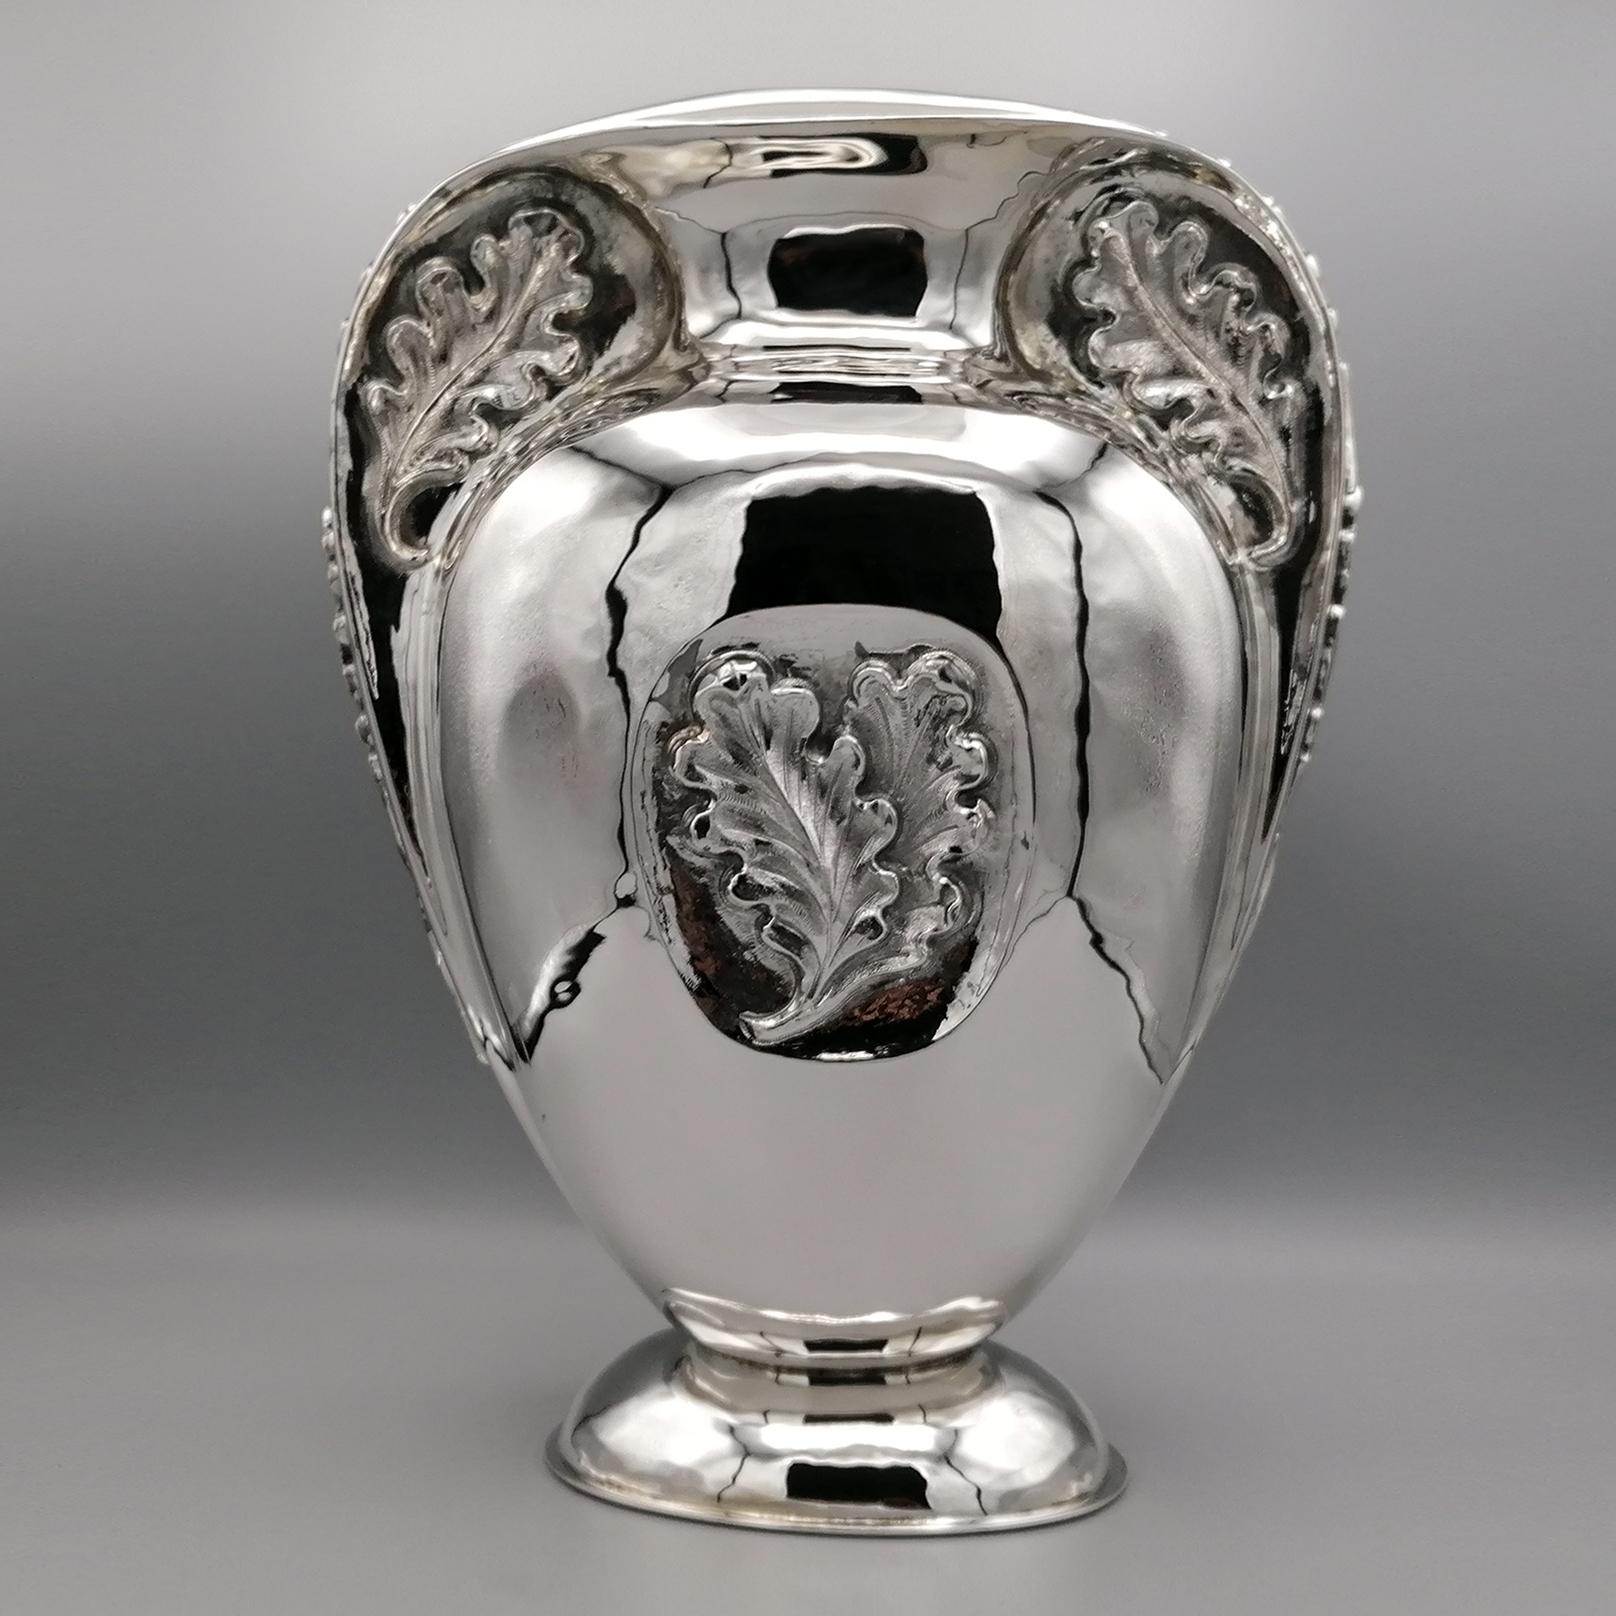 Vase in 925 Sterling silver called Vaso Quercia - Oak Vase, completely handmade by stuffing the raw silver sheet.
A very long and careful craftsmanship made by a master silversmith, has allowed this masterpiece of modern silverware to take